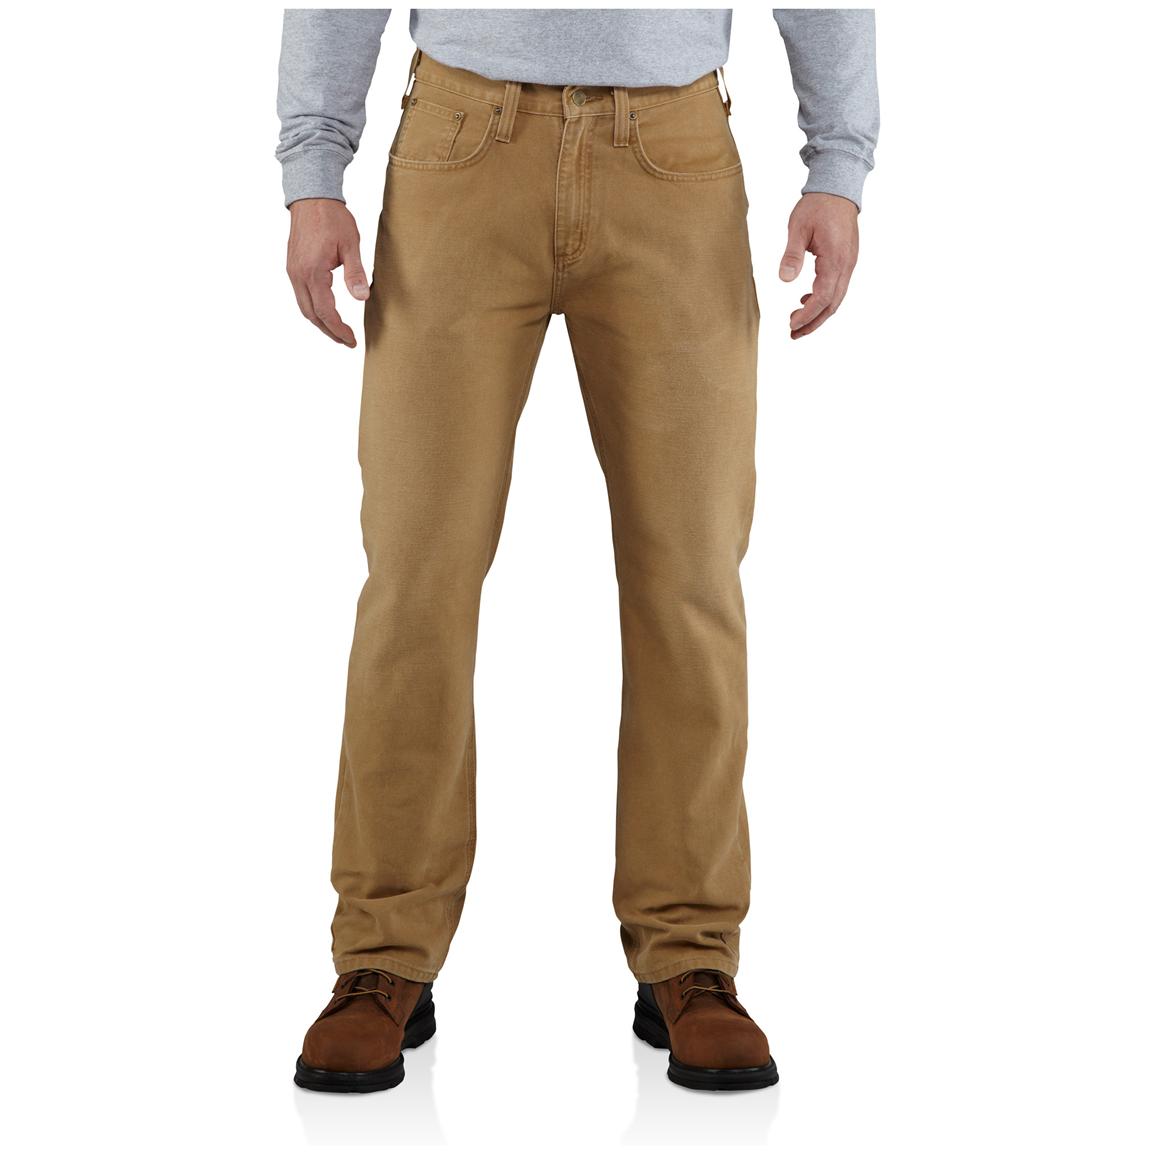 Carhartt® Weathered Duck Work Pants - 427598, Jeans & Pants at ...